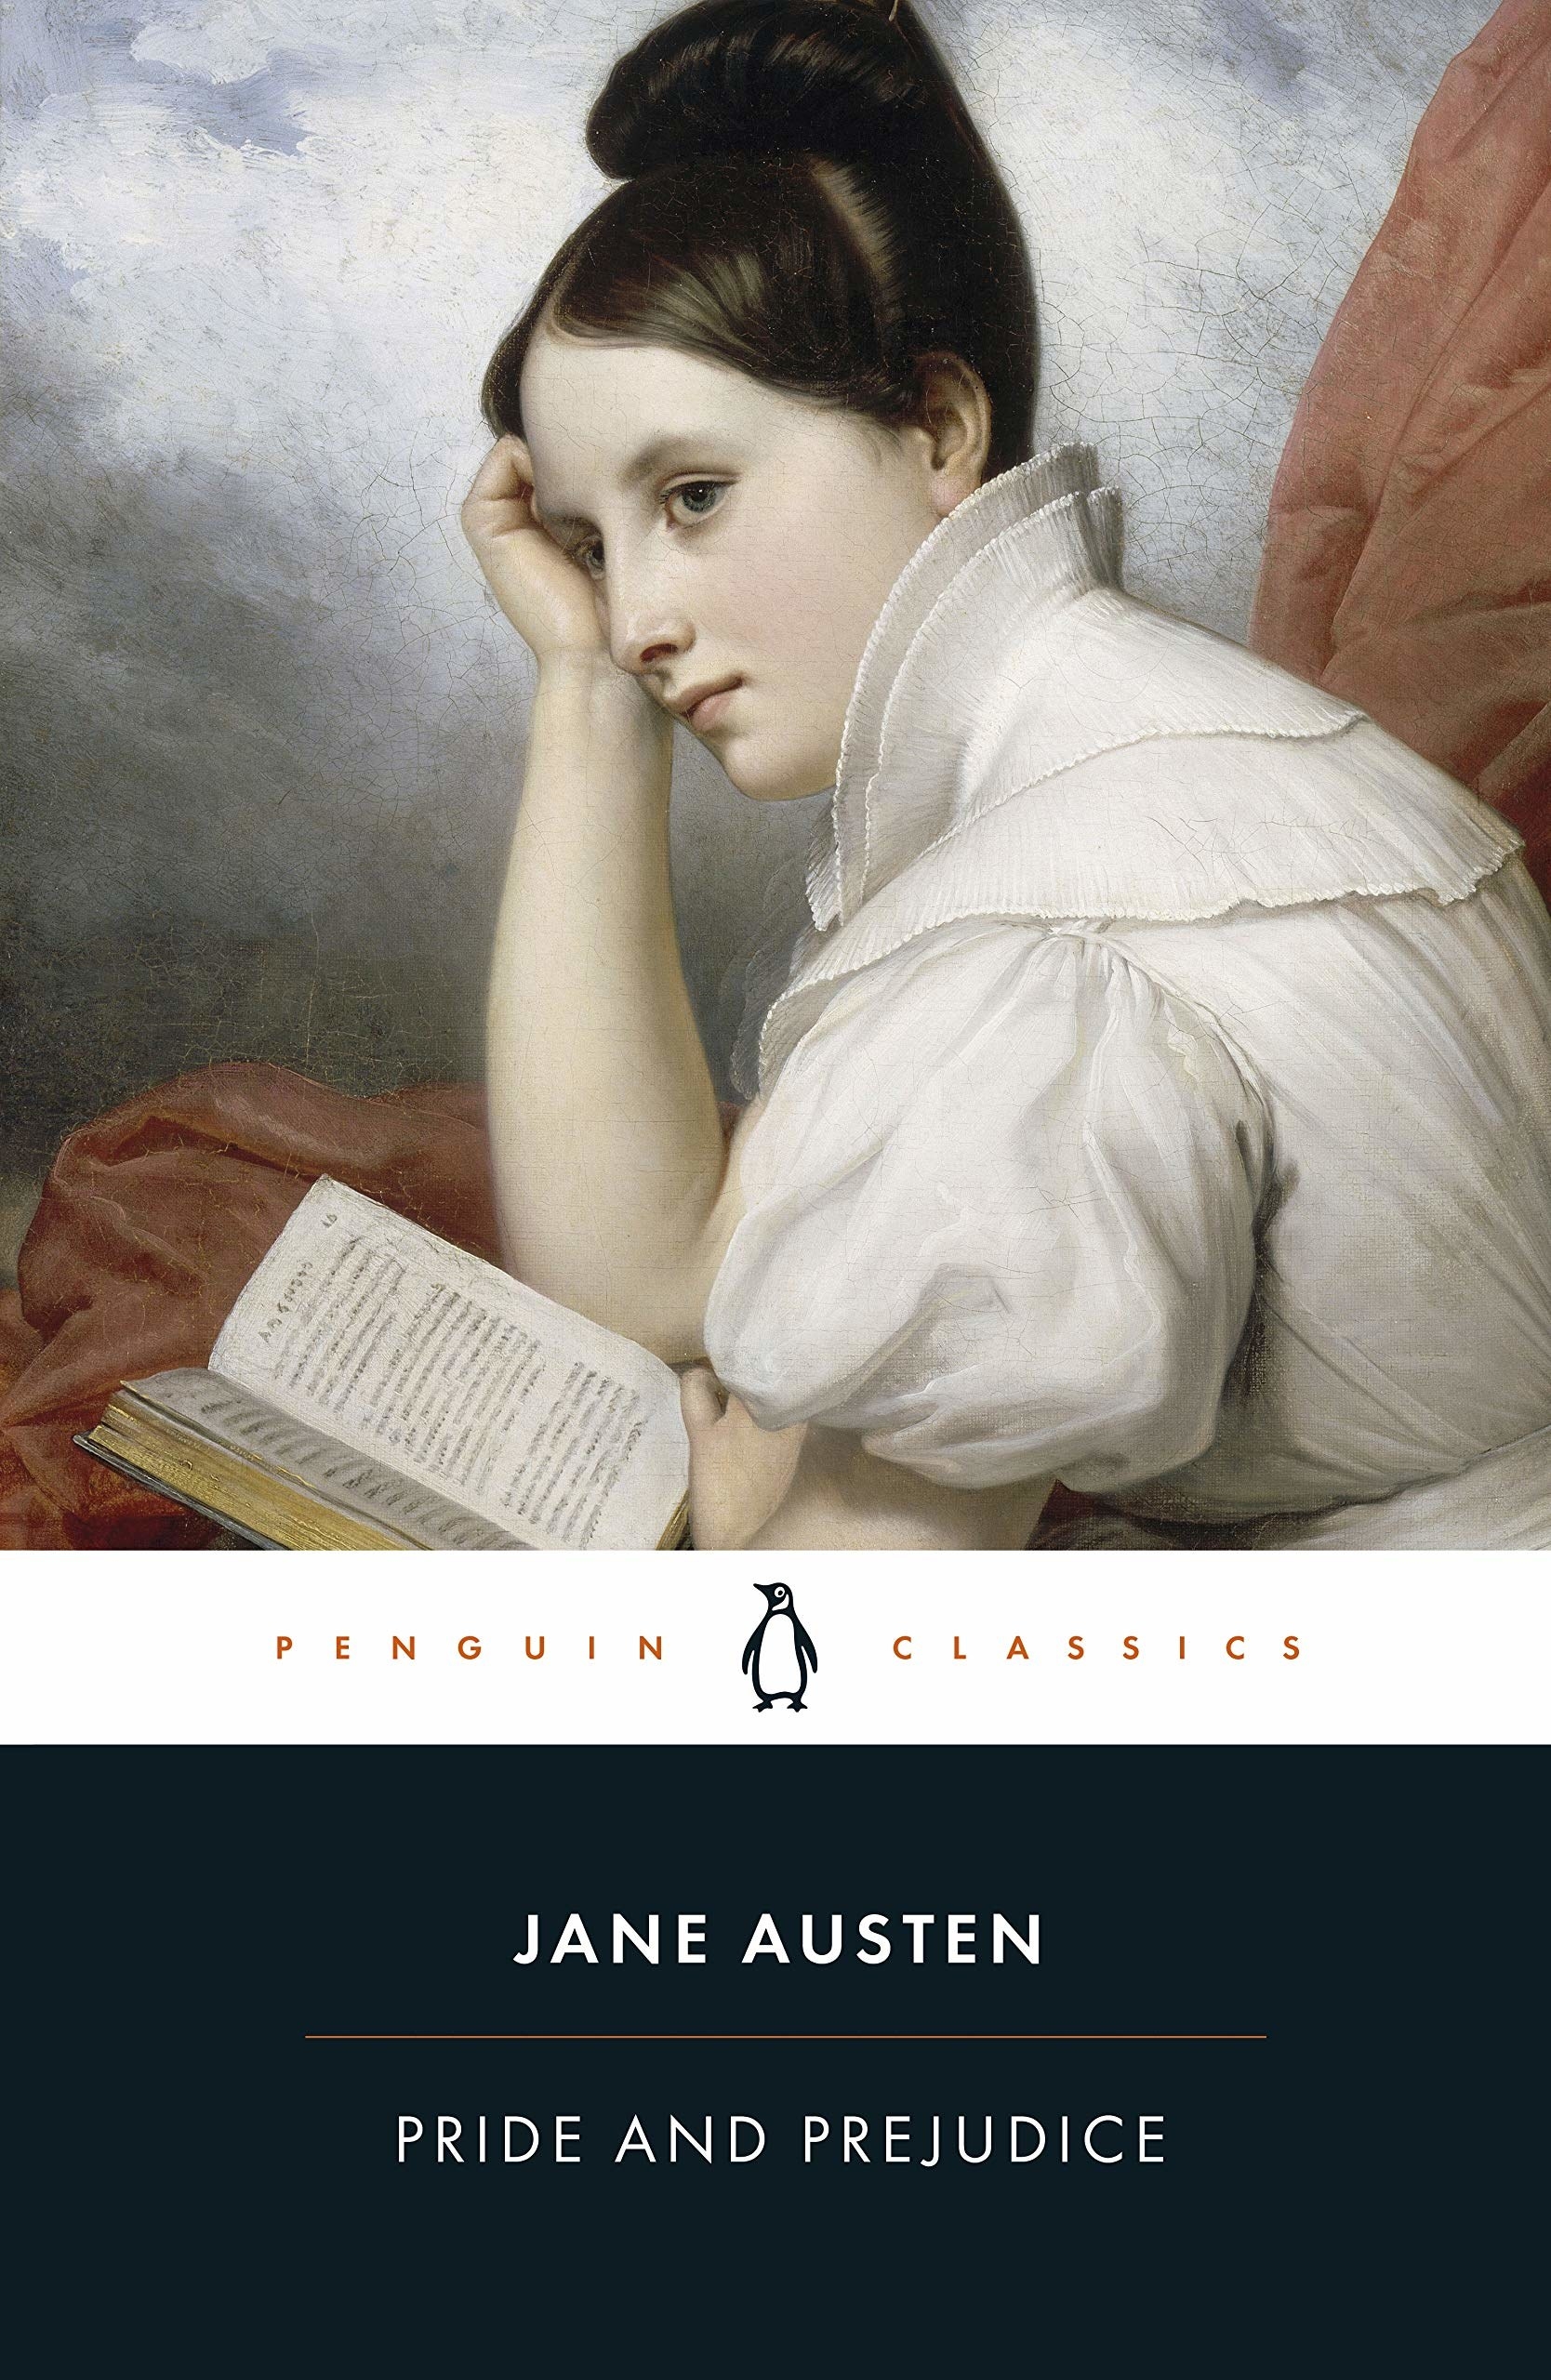 Woman reading on the book cover